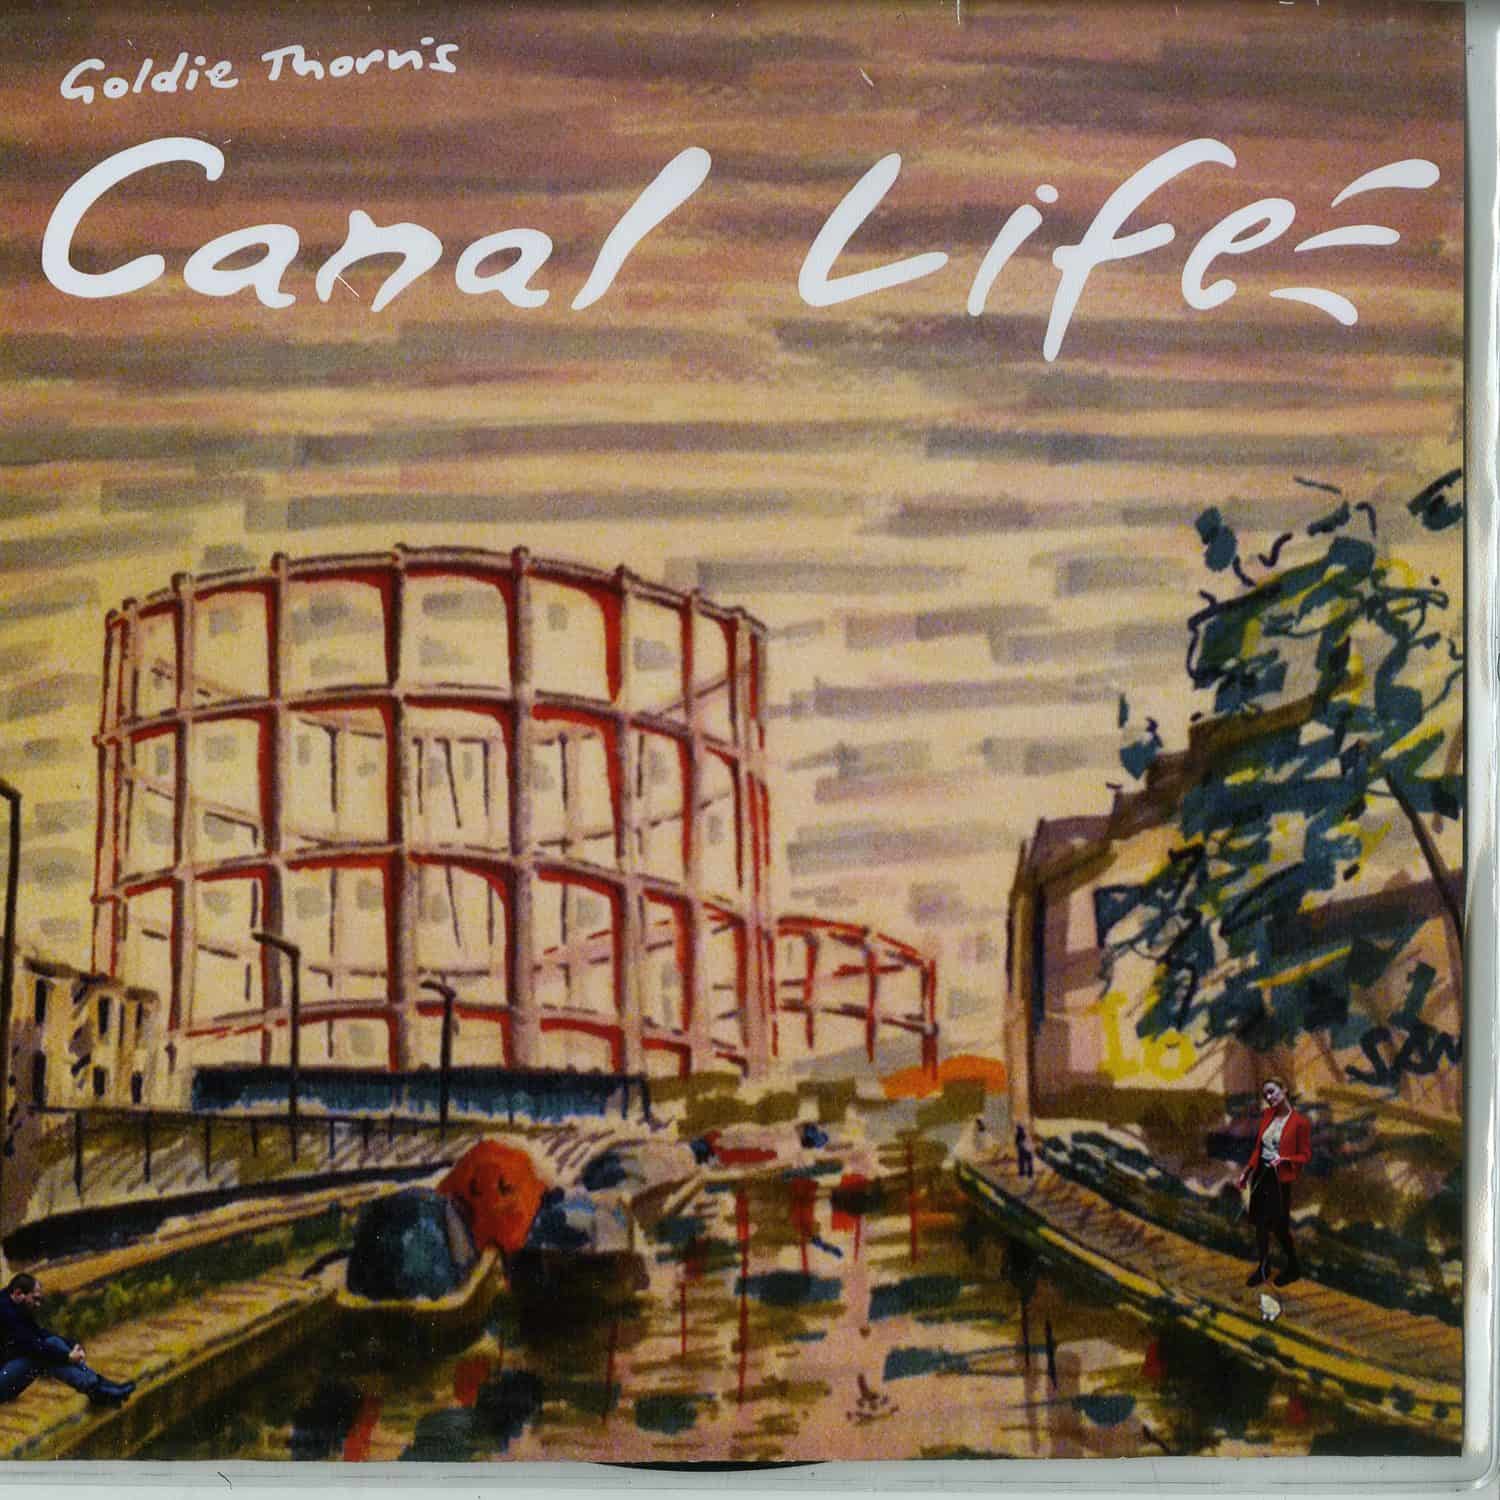 Goldie Thorn - CANAL LIFE